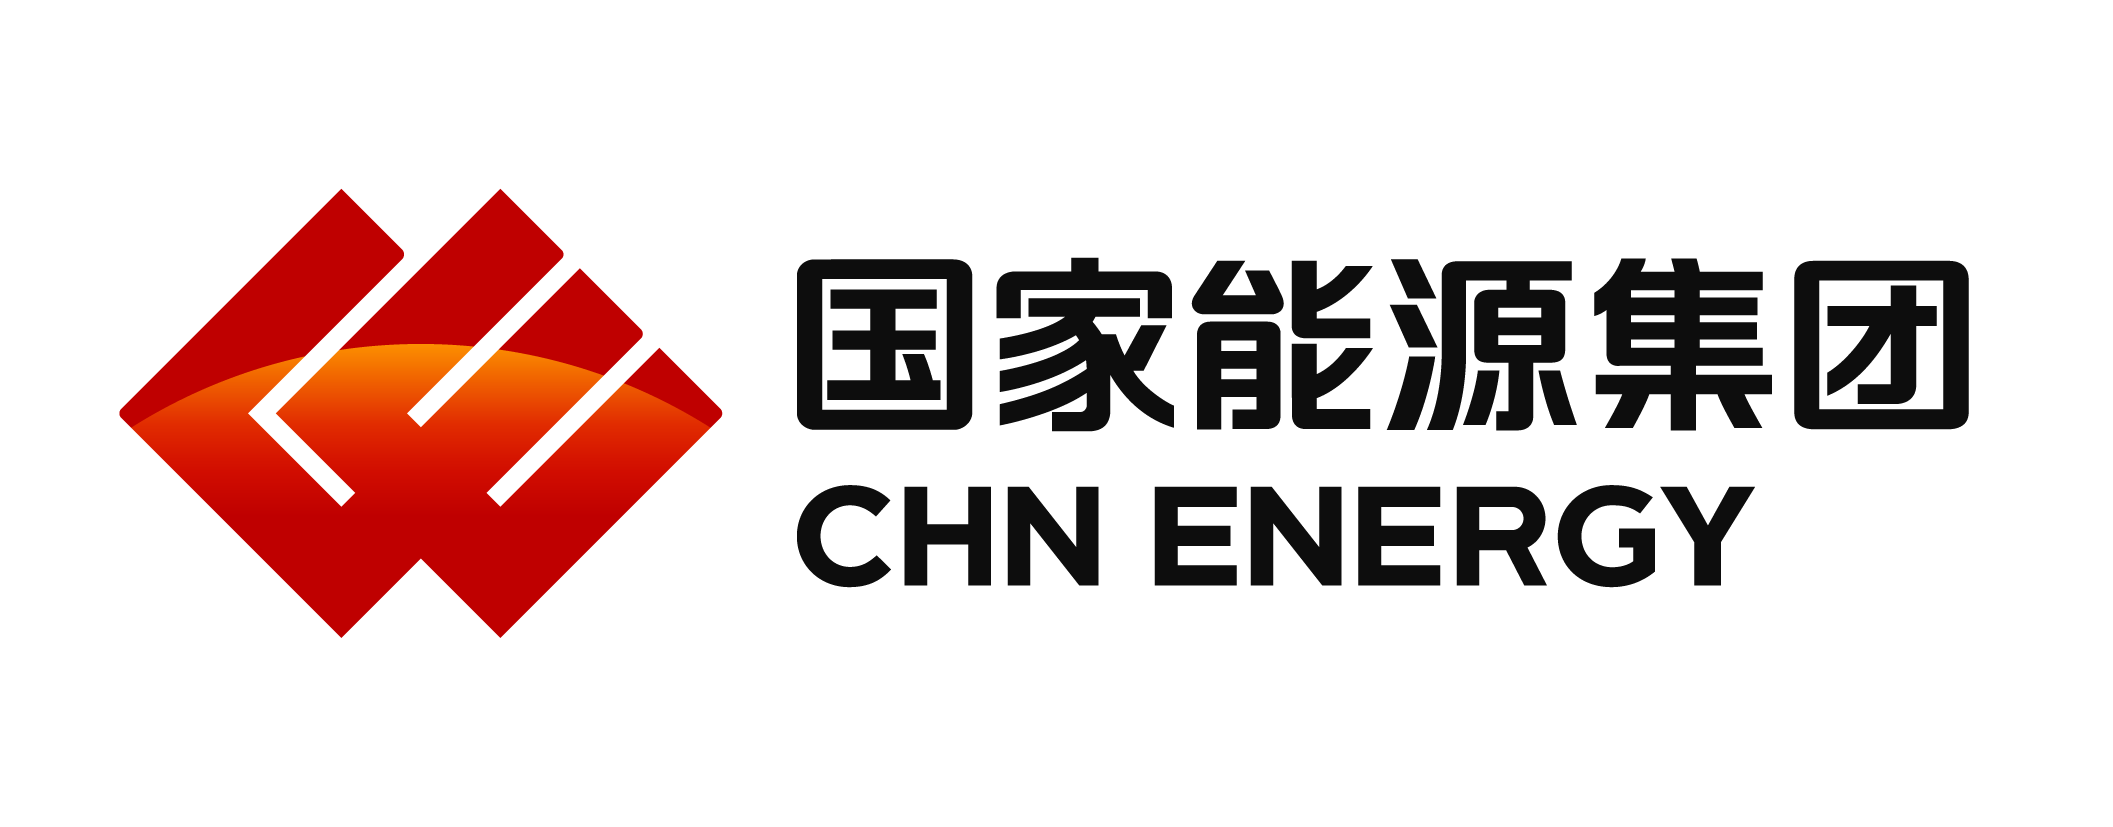 CHN Energy Investment Group